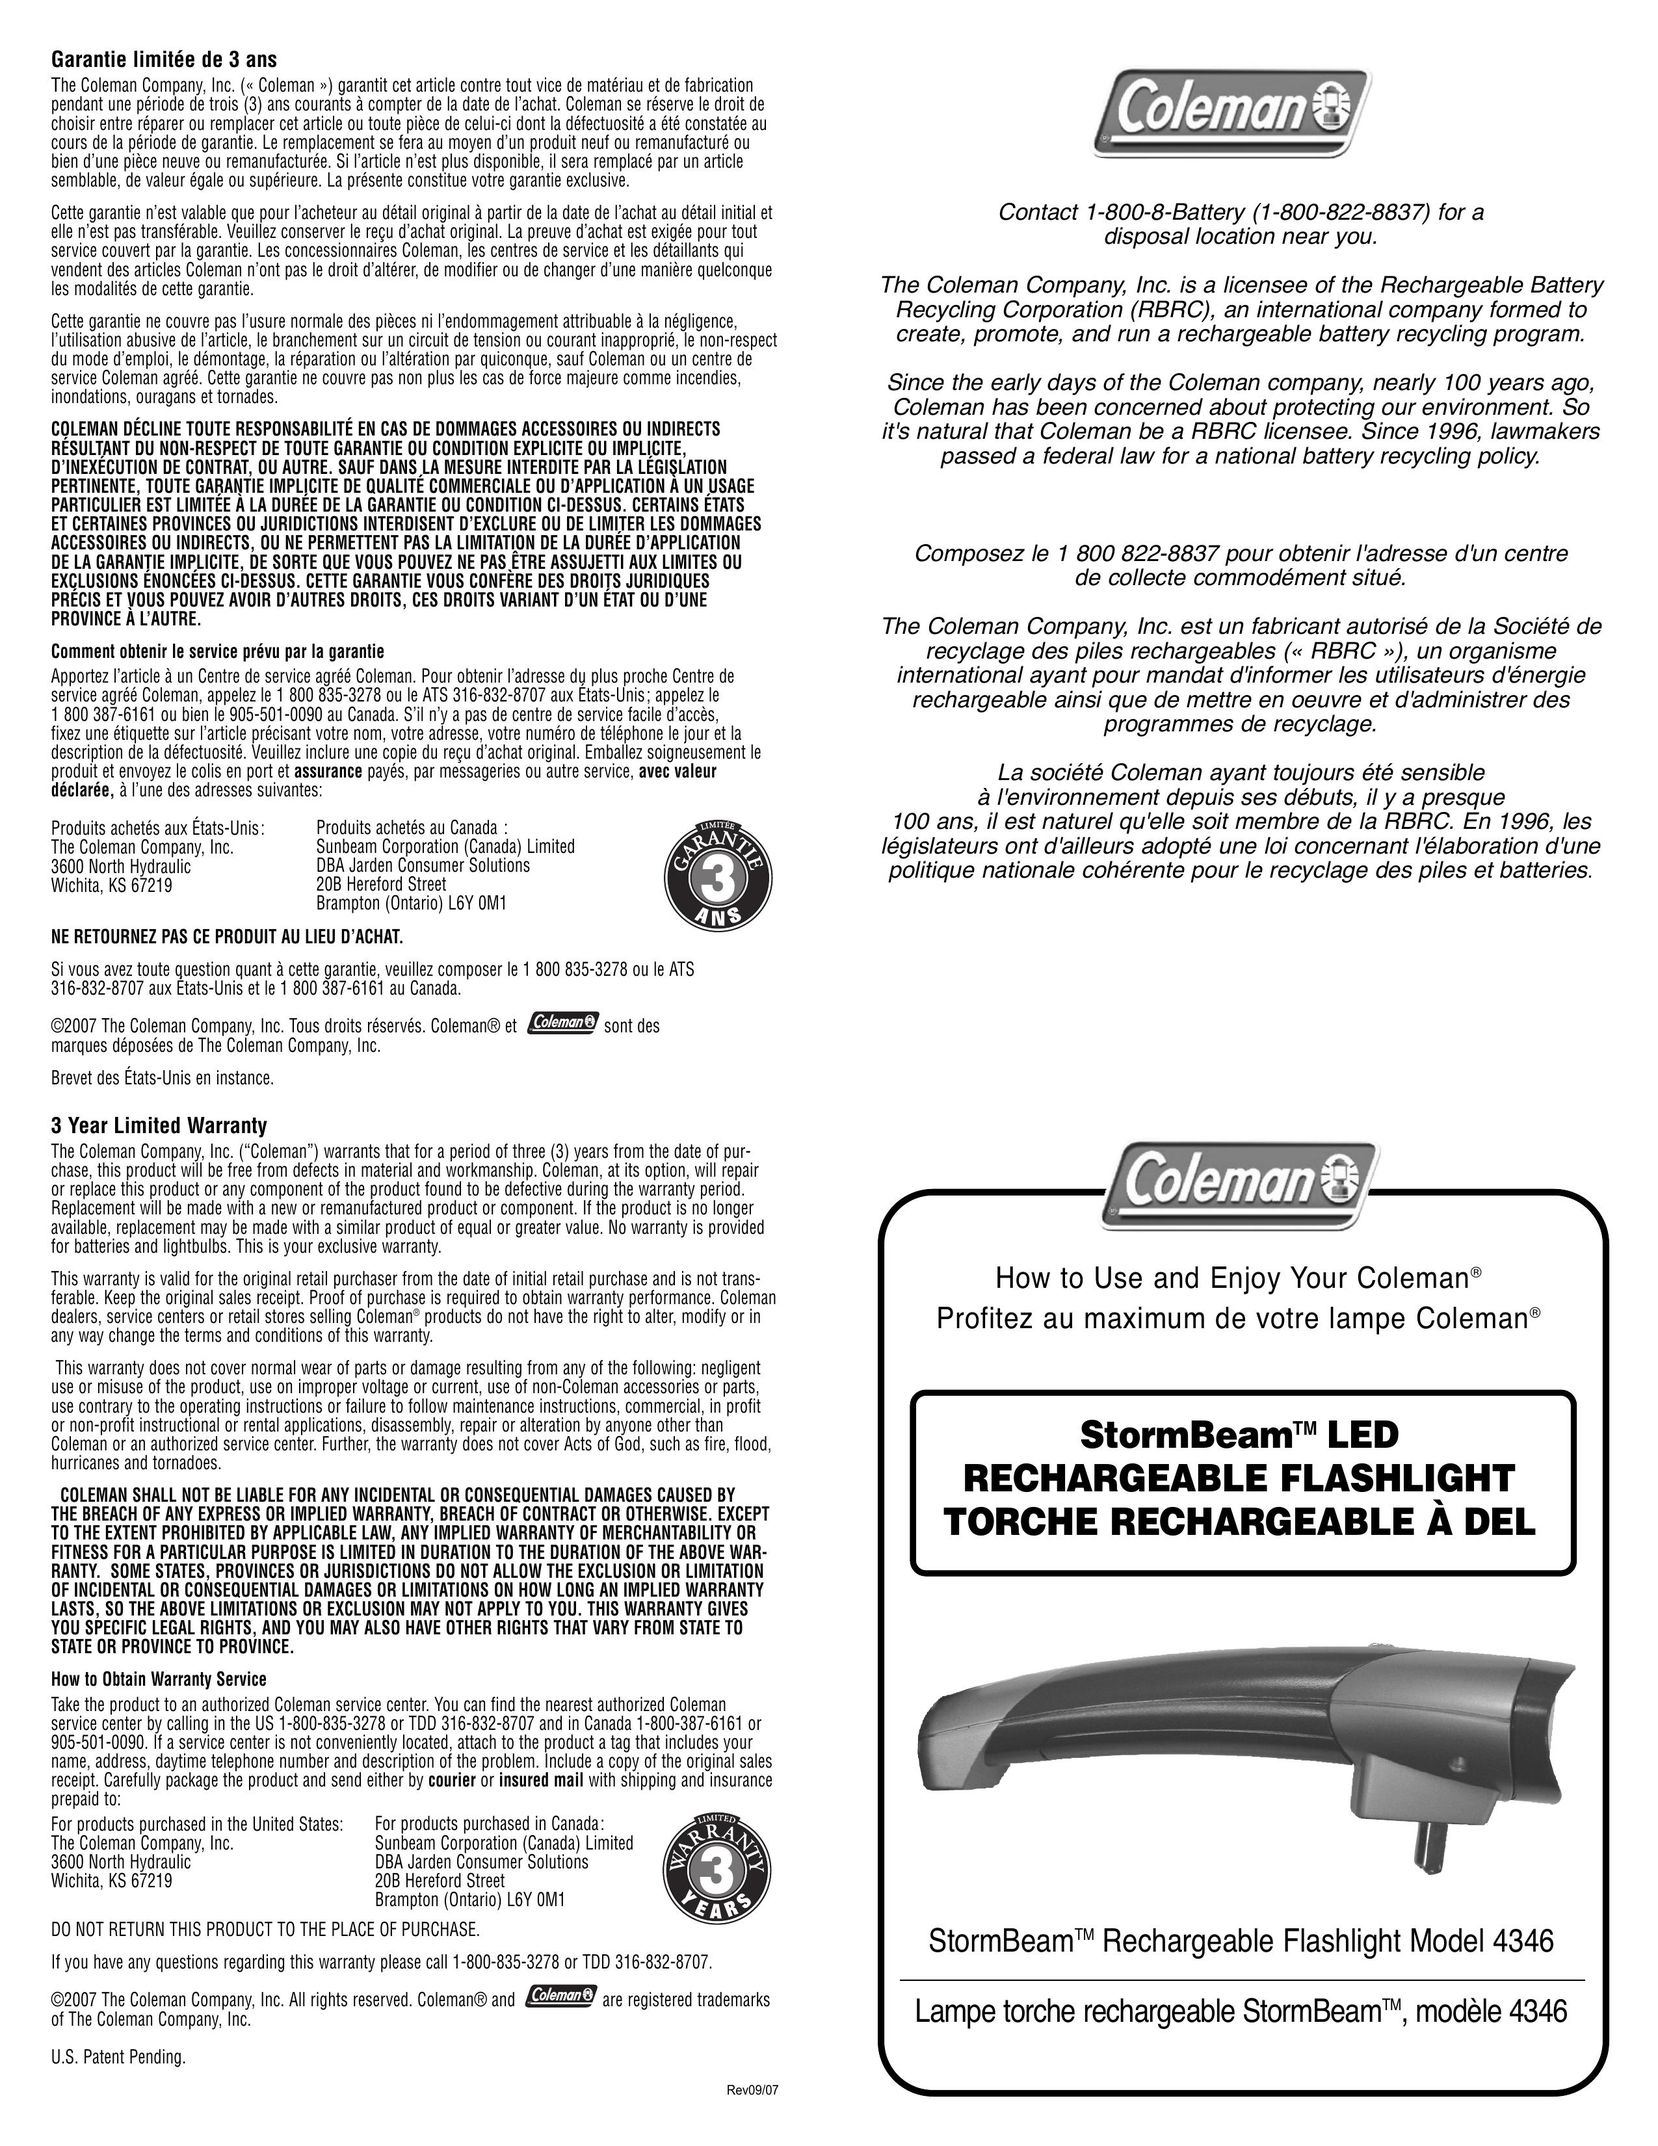 Coleman 4346 Home Safety Product User Manual